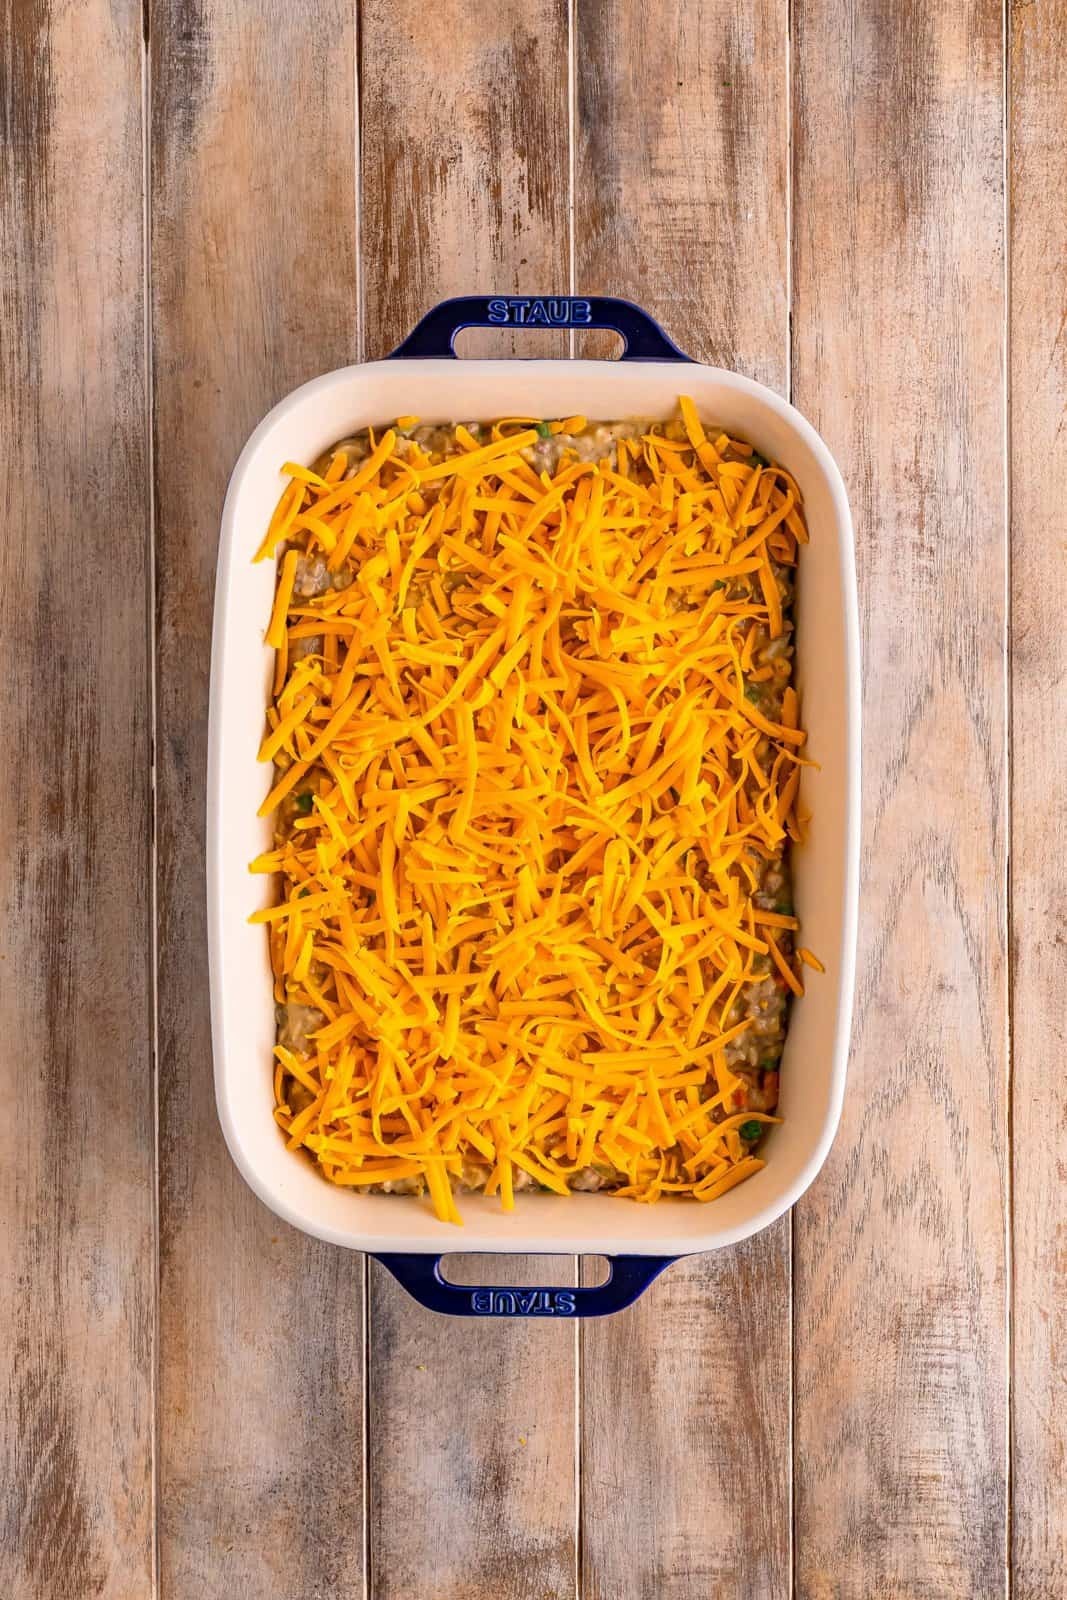 A casserole dish with a ground beef and rice casserole in it covered with shredded cheese.